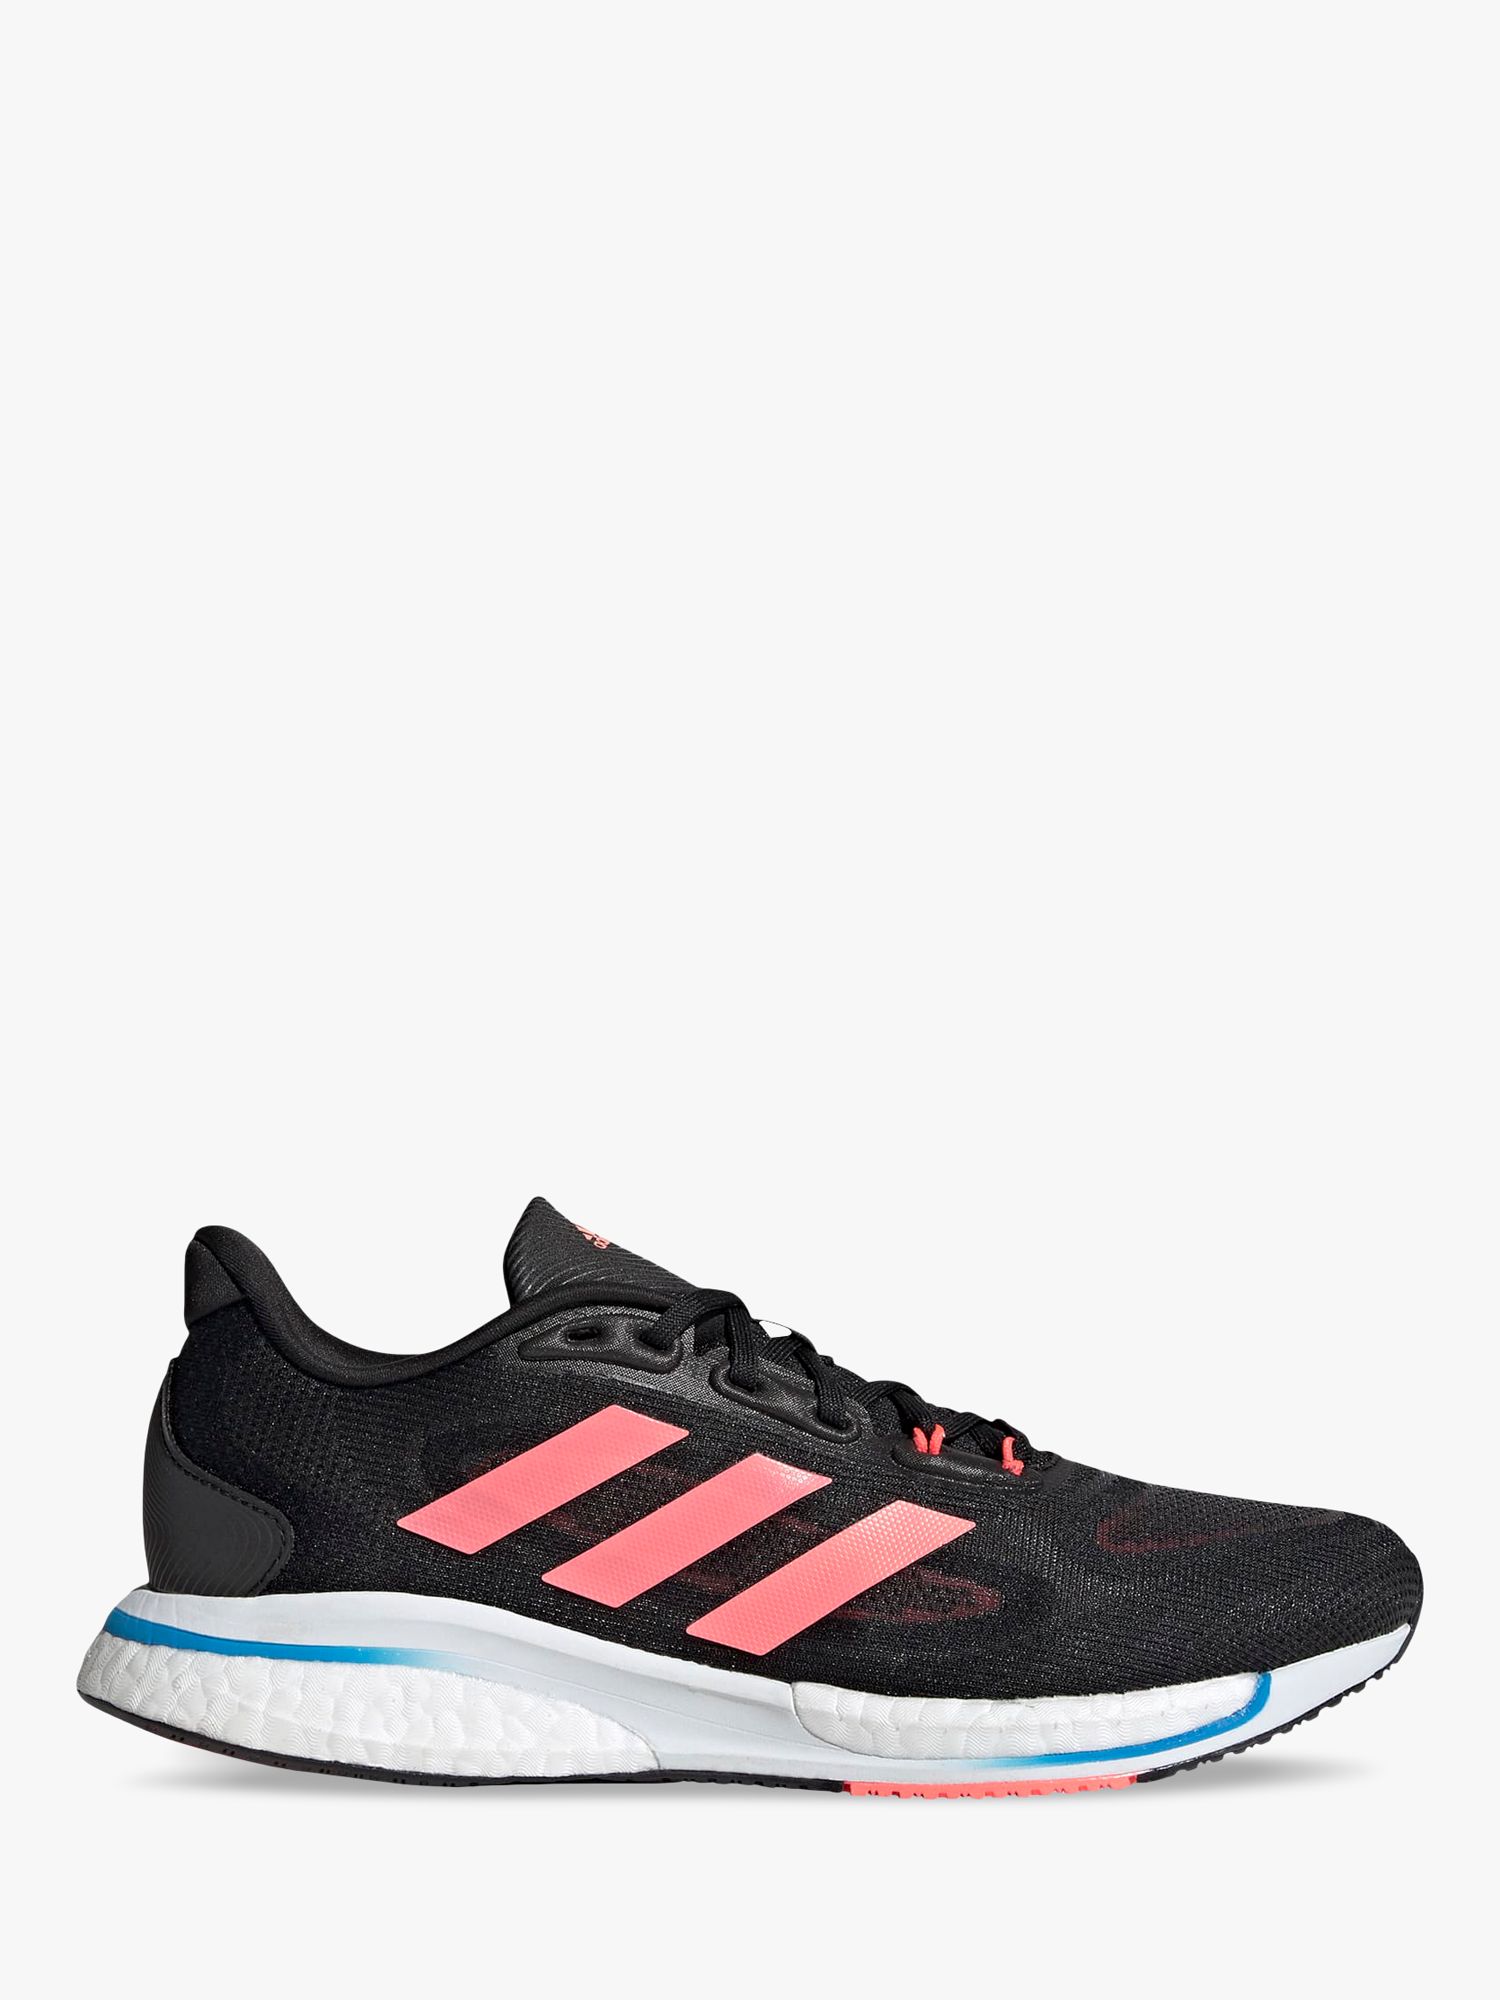 adidas Supernova+ Women's Running Shoes Core Black/Acid Red/Turbo 7.5 female Upper: synthetic textile, Sole: rubber